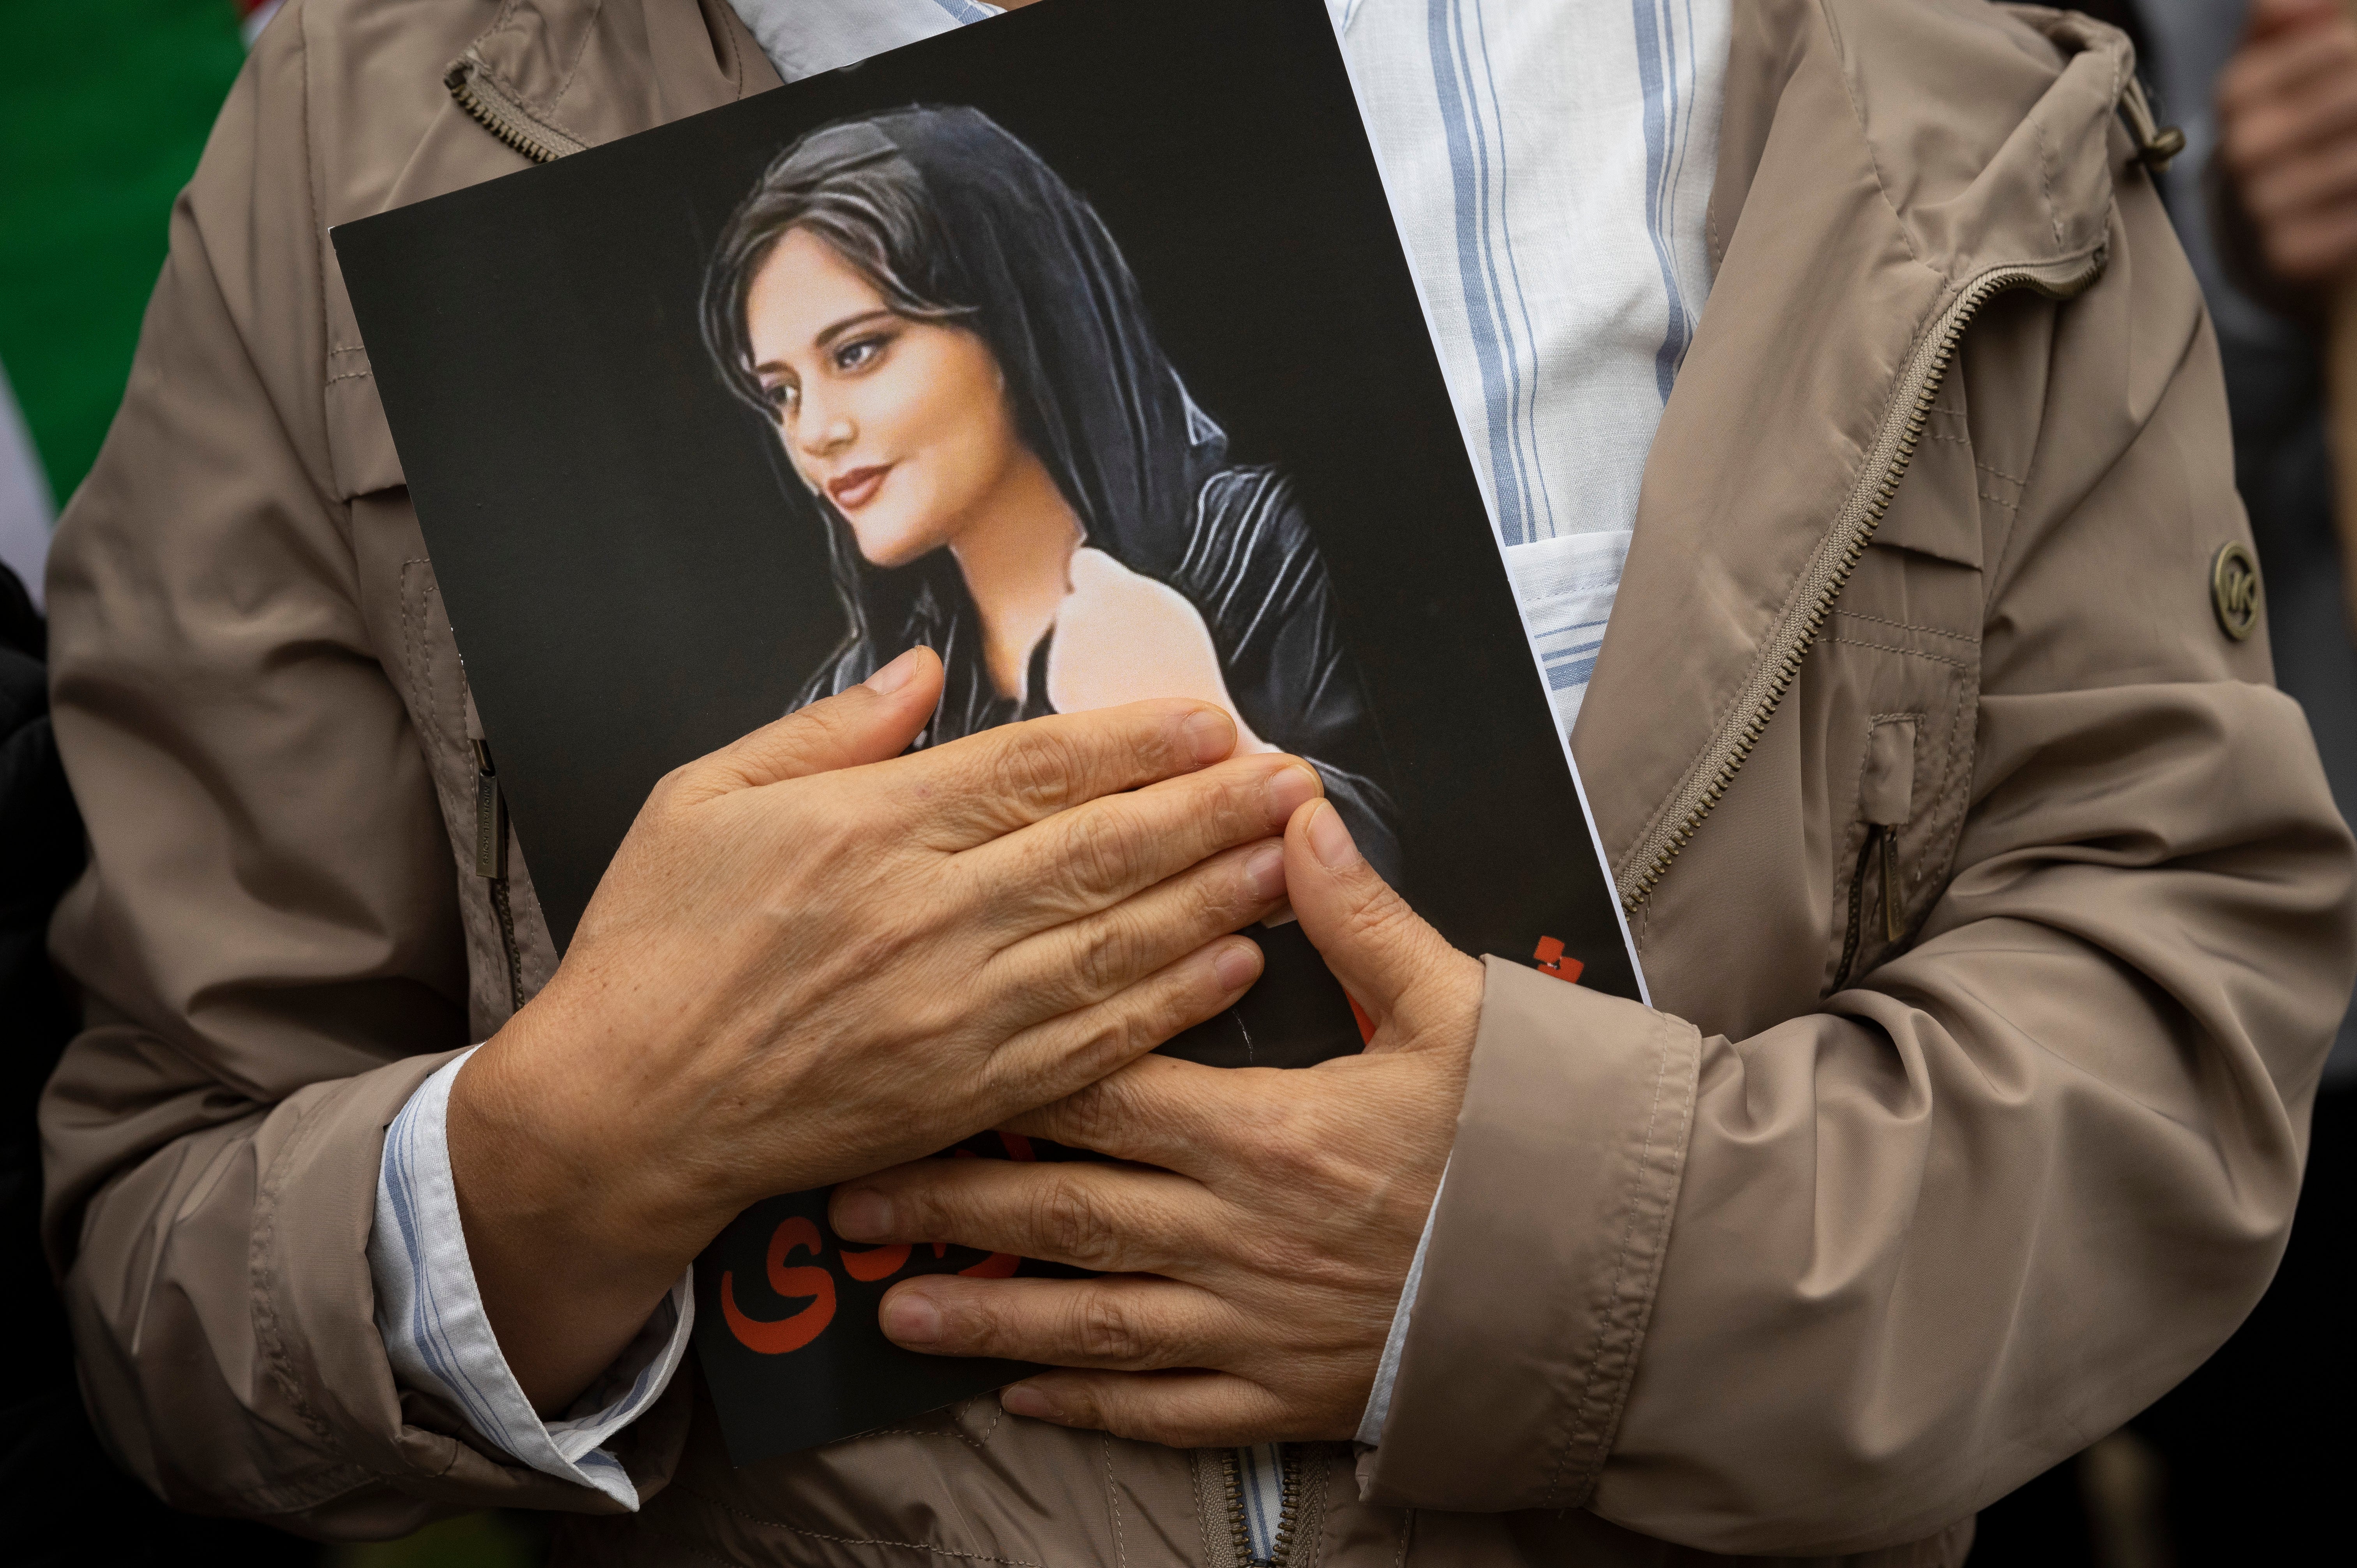 A portrait of Mahsa Amini is held during a rally in Washington